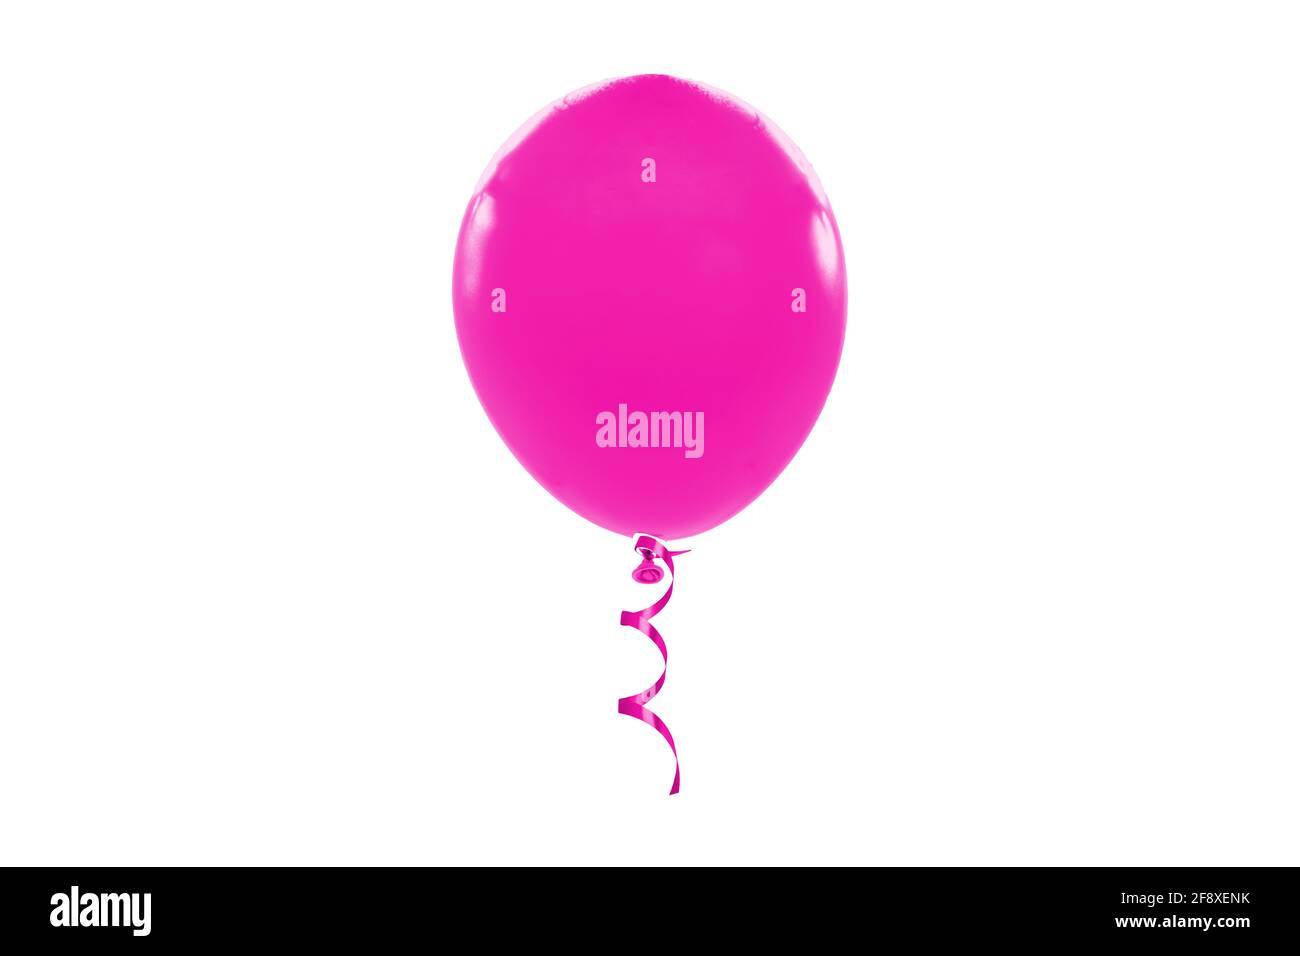 Pink air balloon isolated on white background Stock Photo